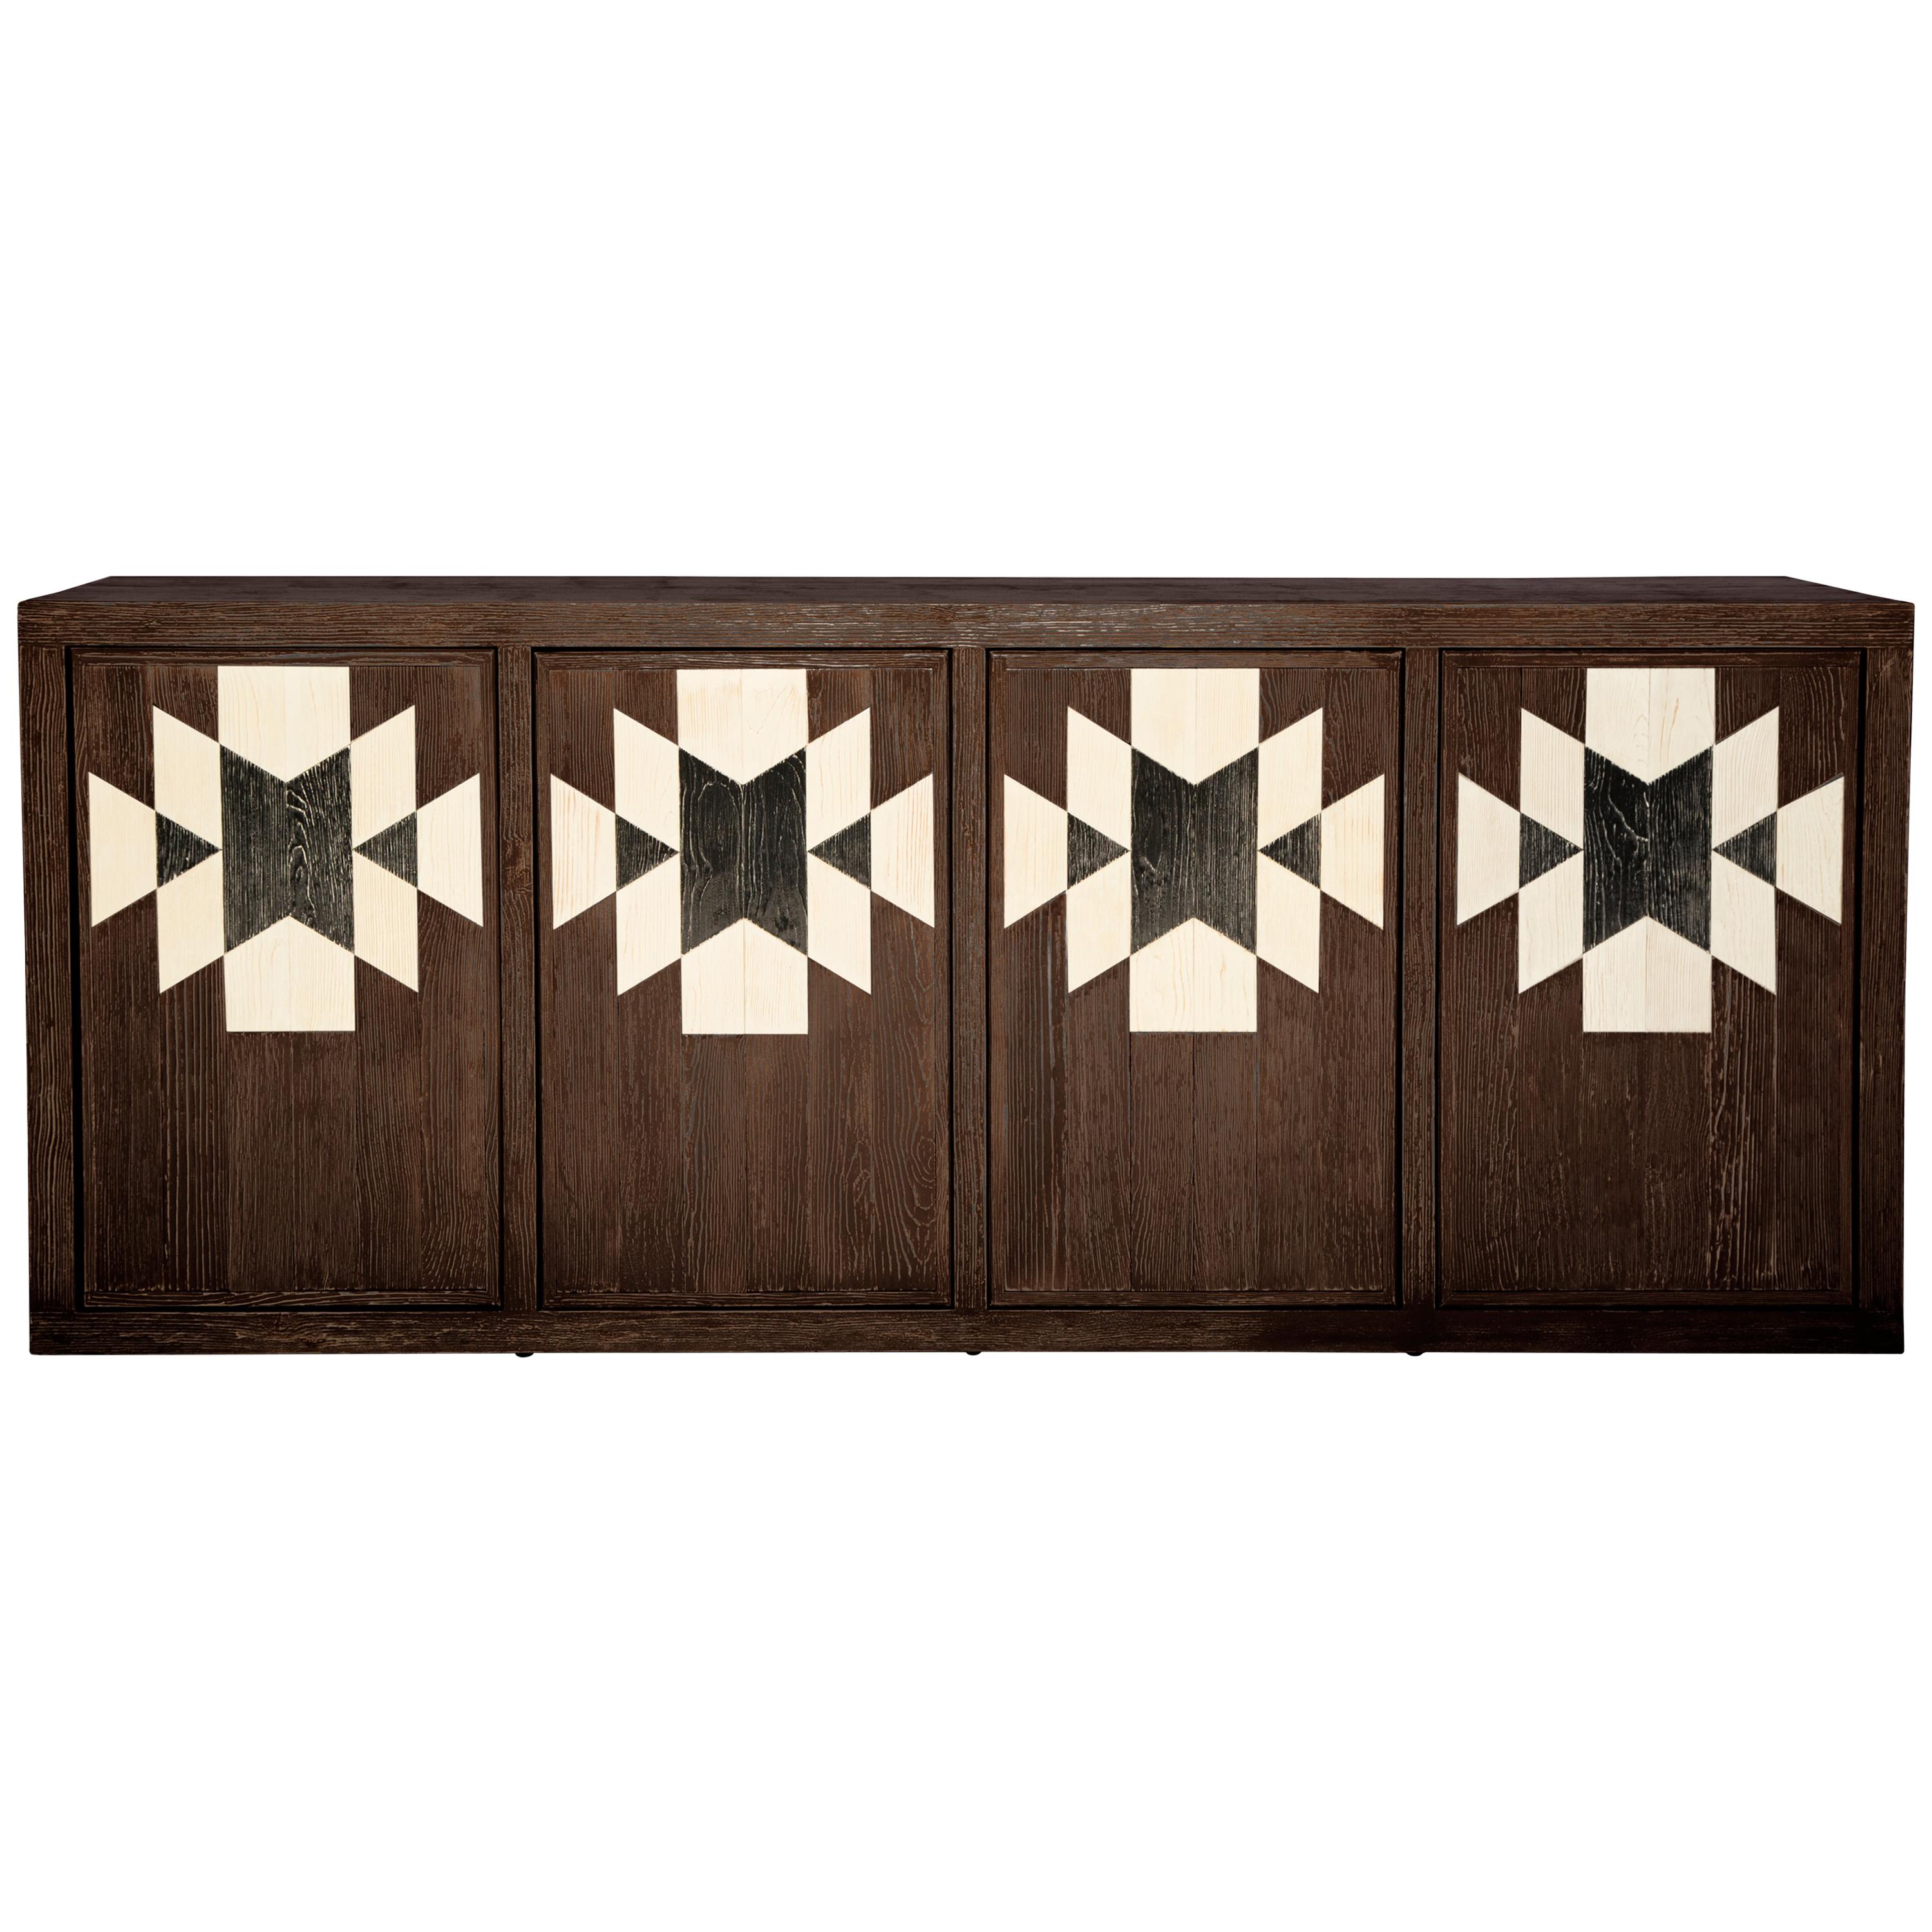 Capistrano Credenza in Chocolate and Onyx Finish by Innova Luxuxy Group For Sale